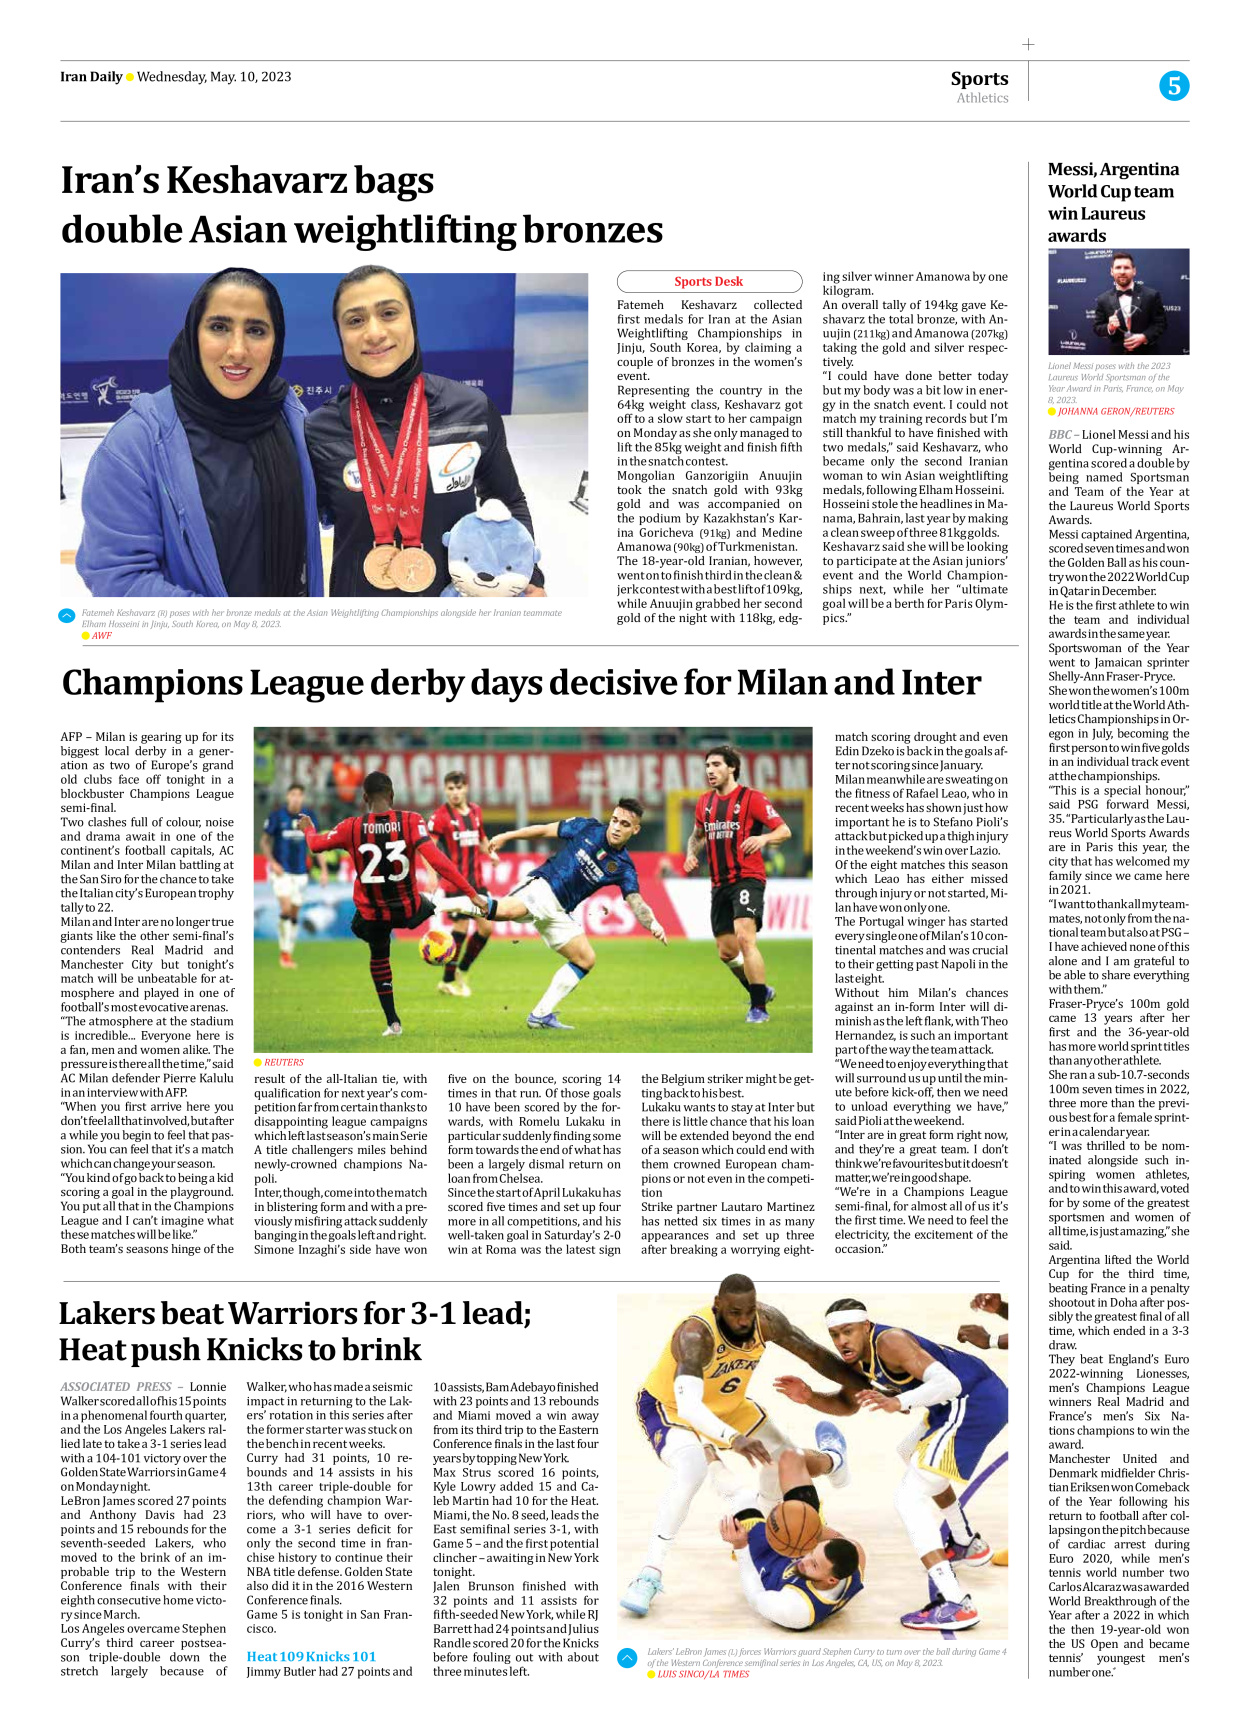 Iran Daily - Number Seven Thousand Two Hundred and Eighty Eight - 10 May 2023 - Page 5